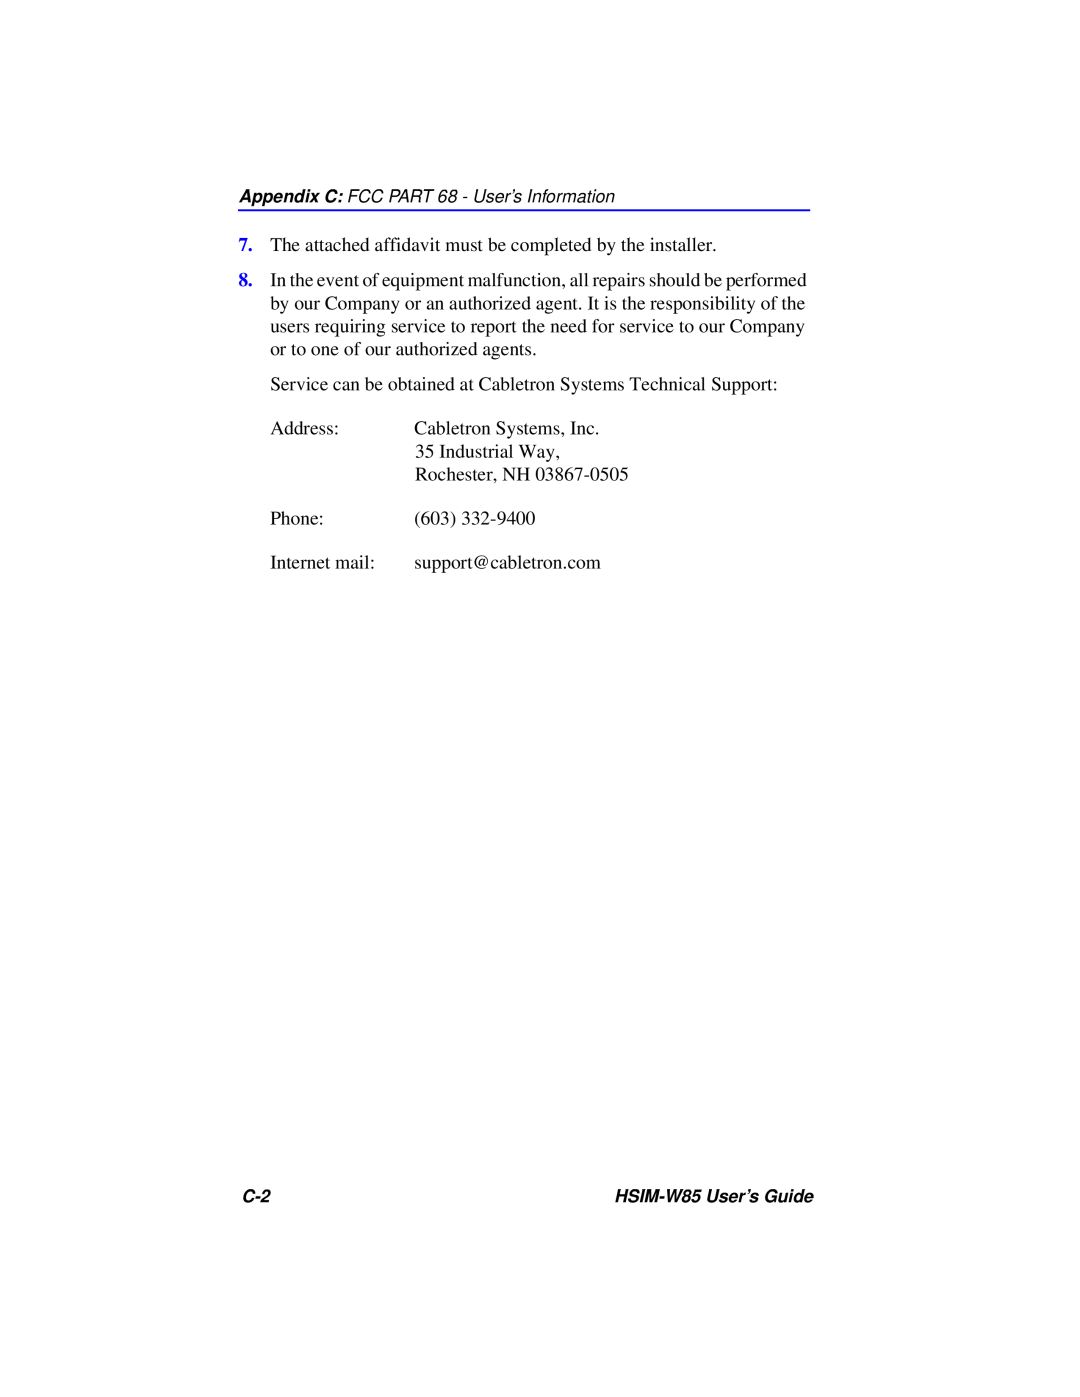 Cabletron Systems W85 manual The attached affidavit must be completed by the installer 